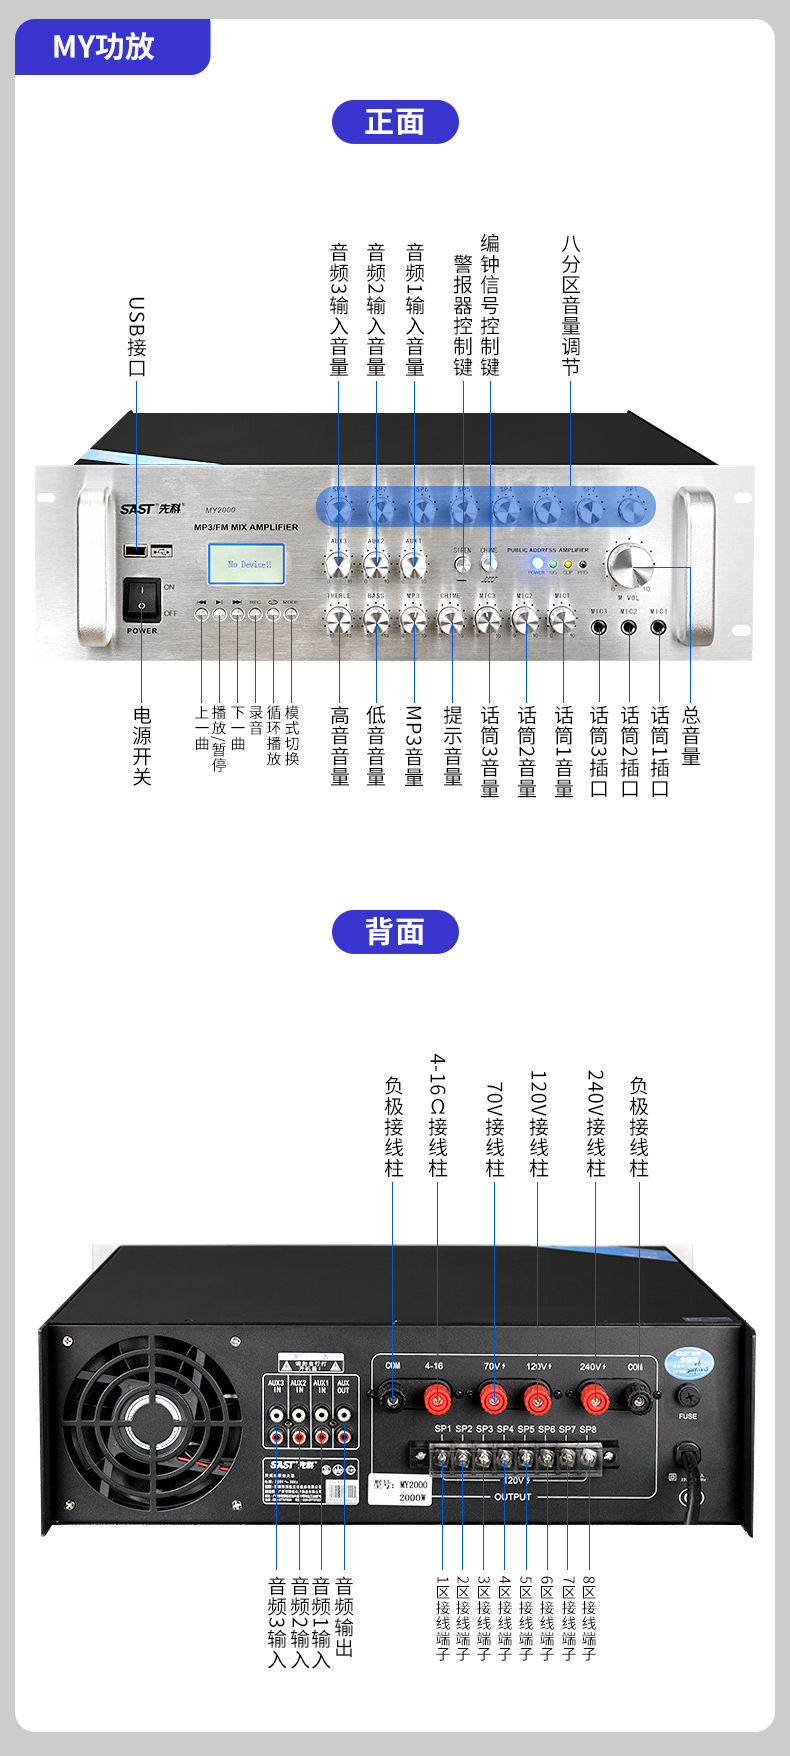 Xianke-9018 Constant Voltage And Constant Resistance Zone Amplifier Bluetooth Music Public Broadcasting System Power Amplifier